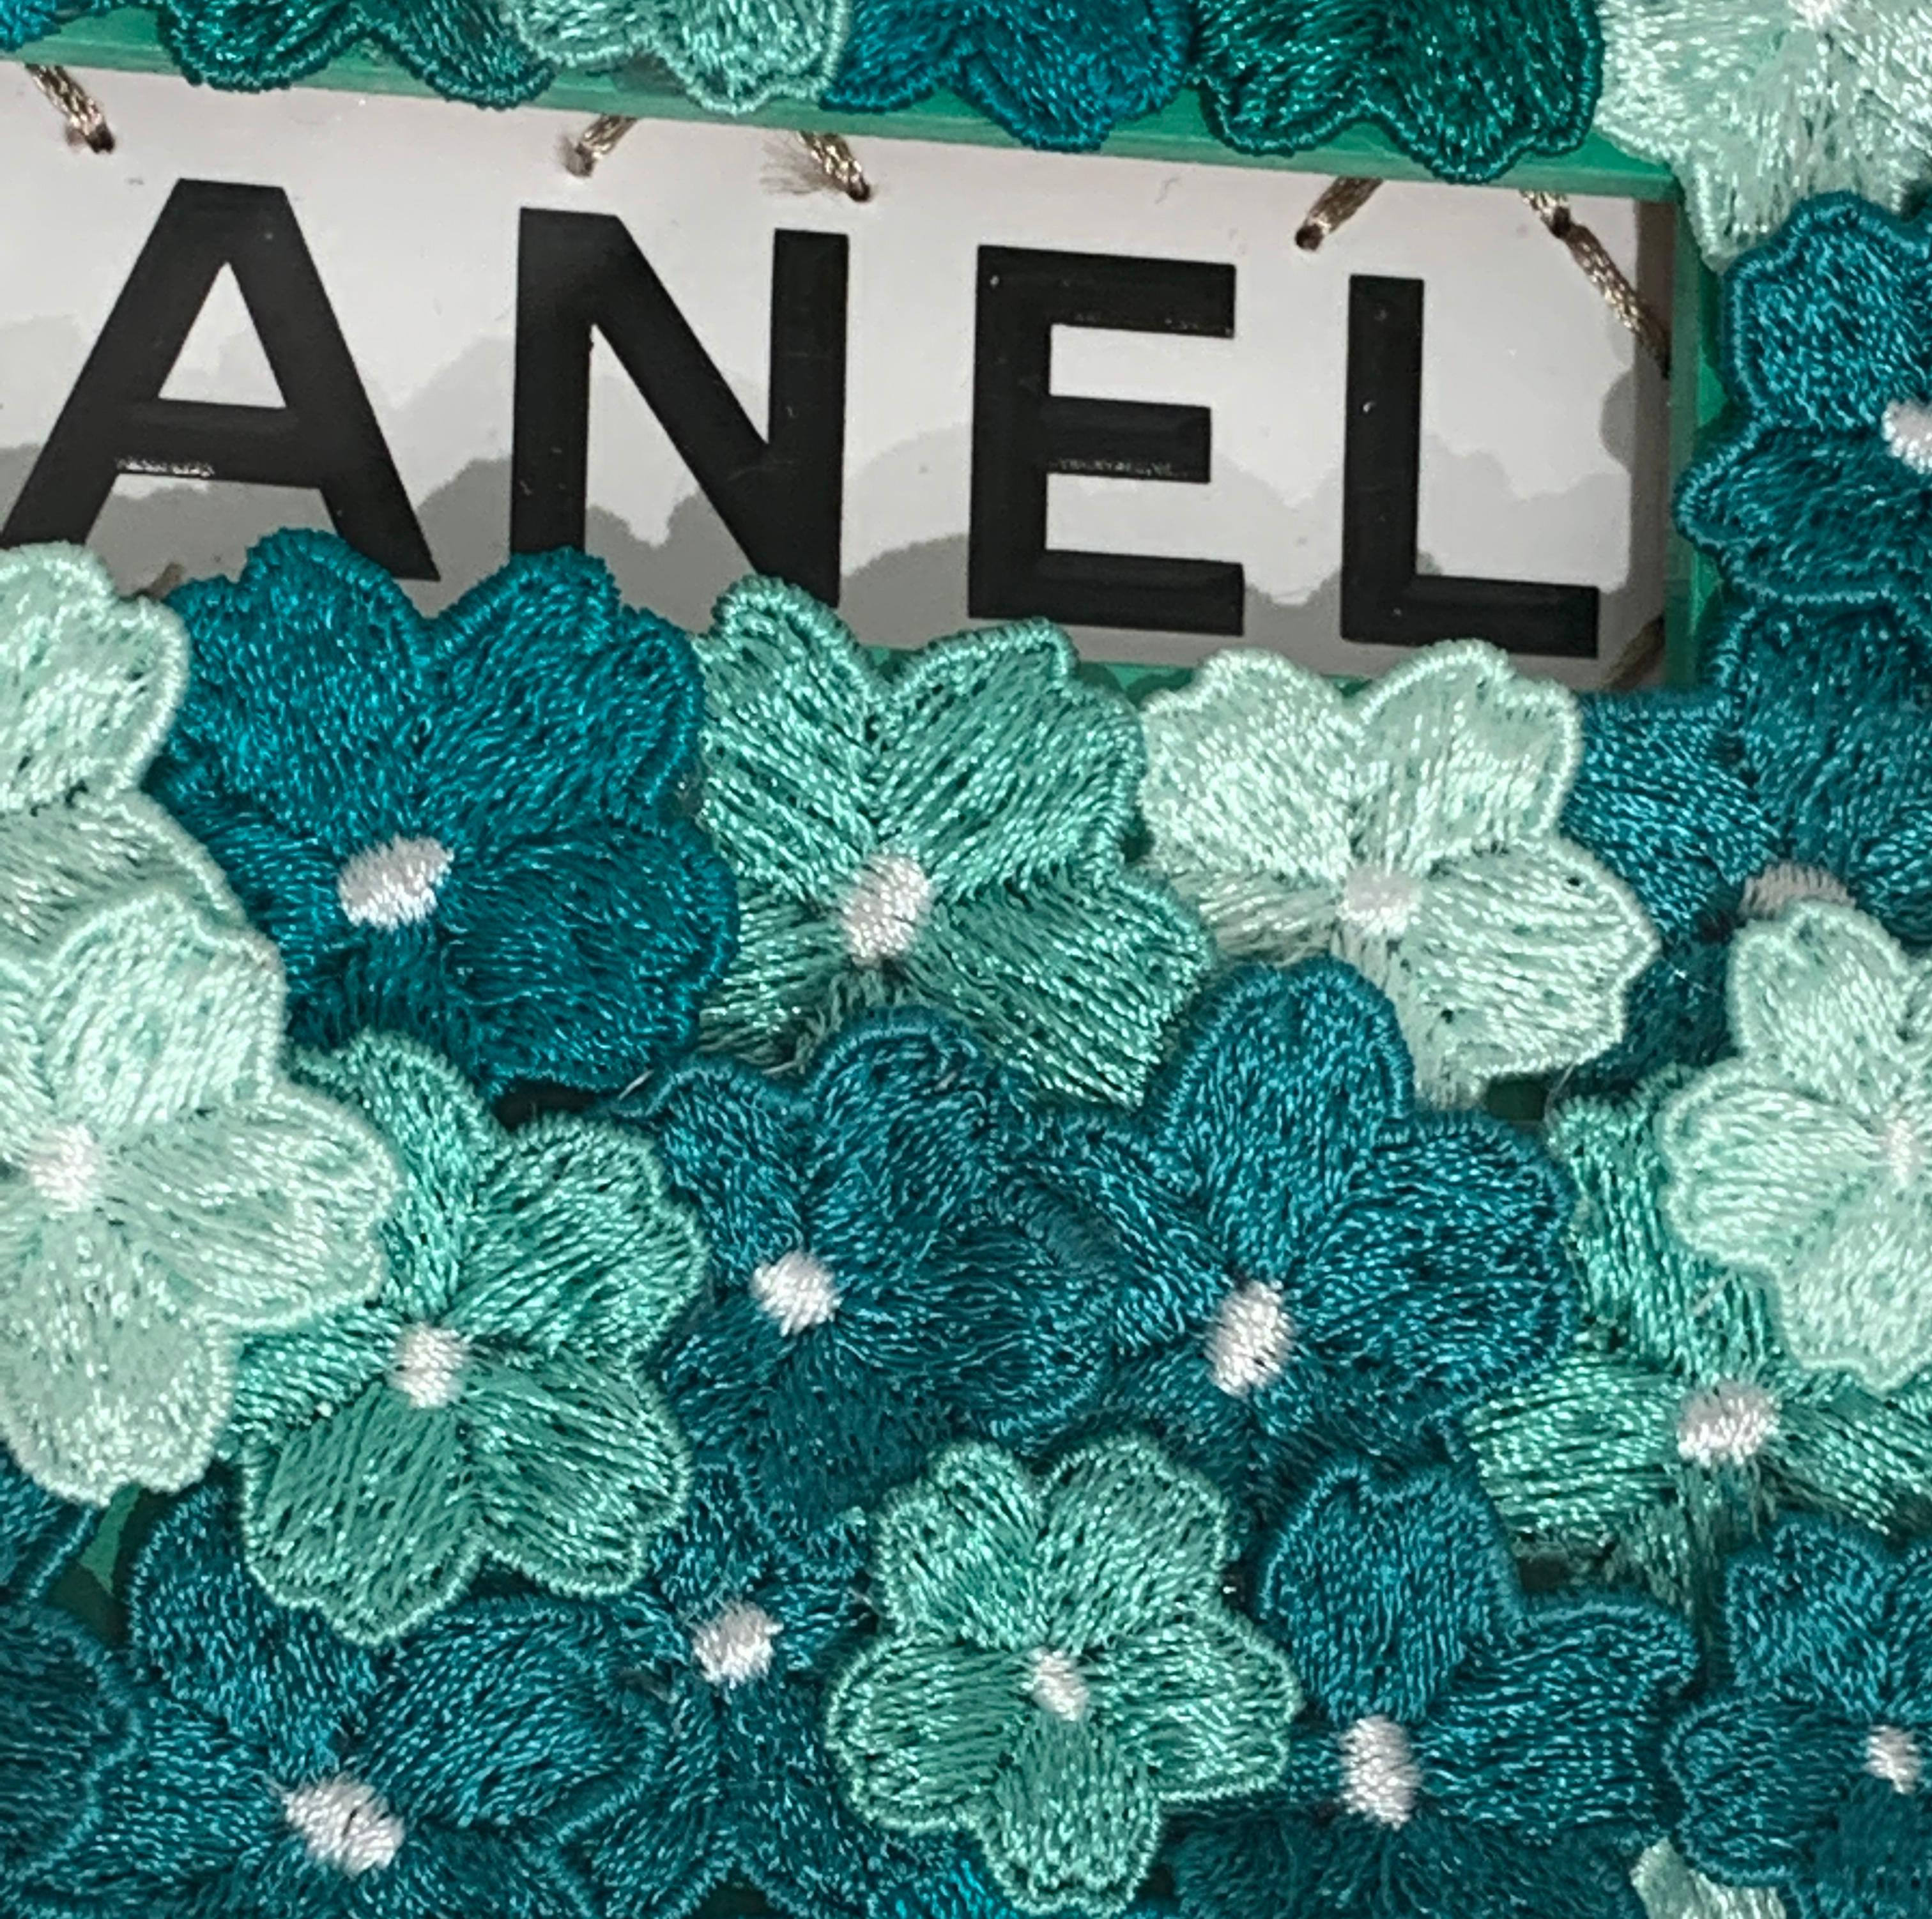 Chanel Flower (Teal), Embroidery Assemblage  - Contemporary Mixed Media Art by Stephen Wilson